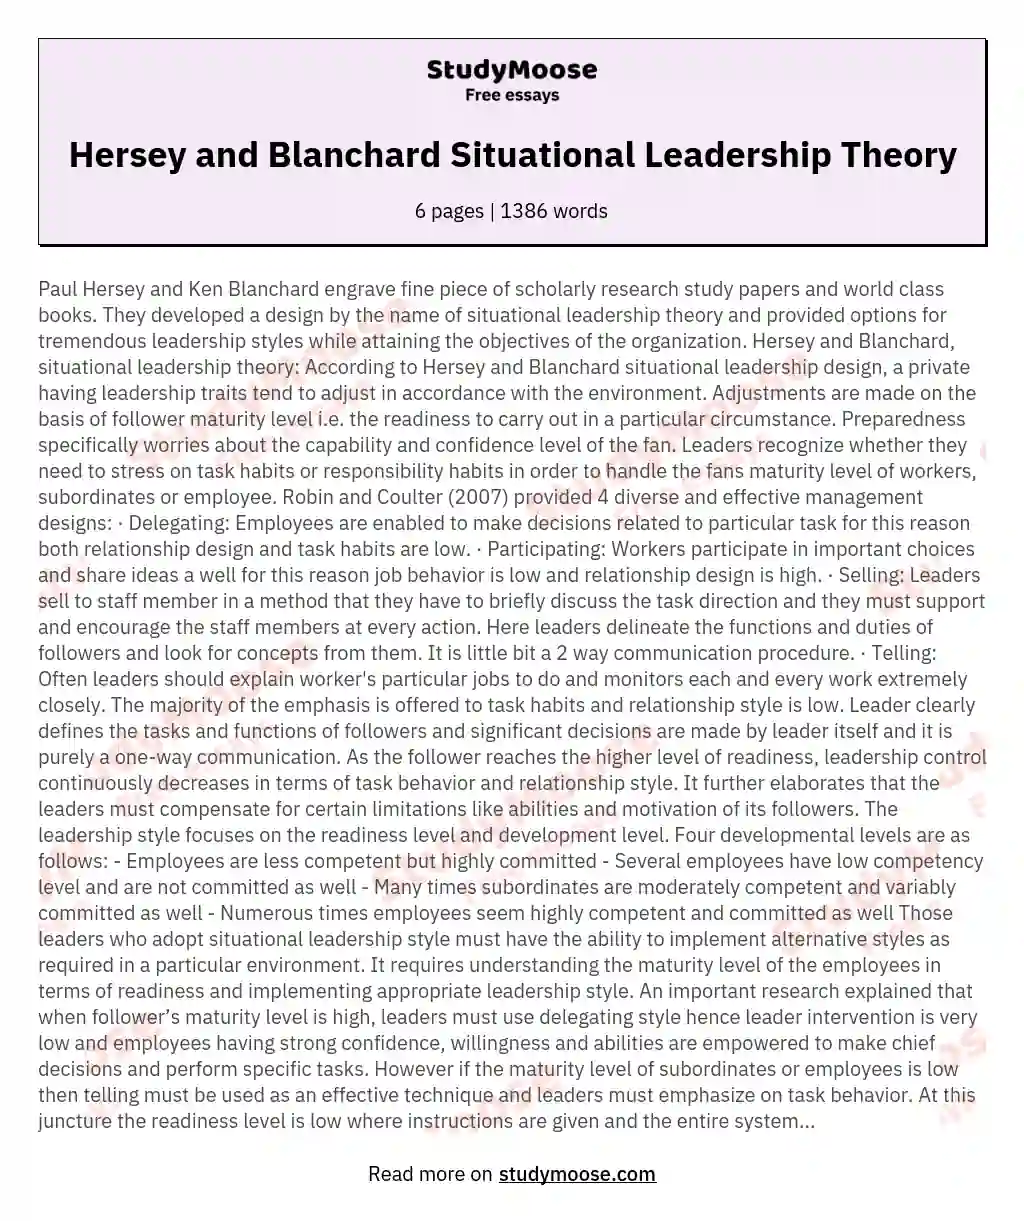 Hersey and Blanchard Situational Leadership Theory